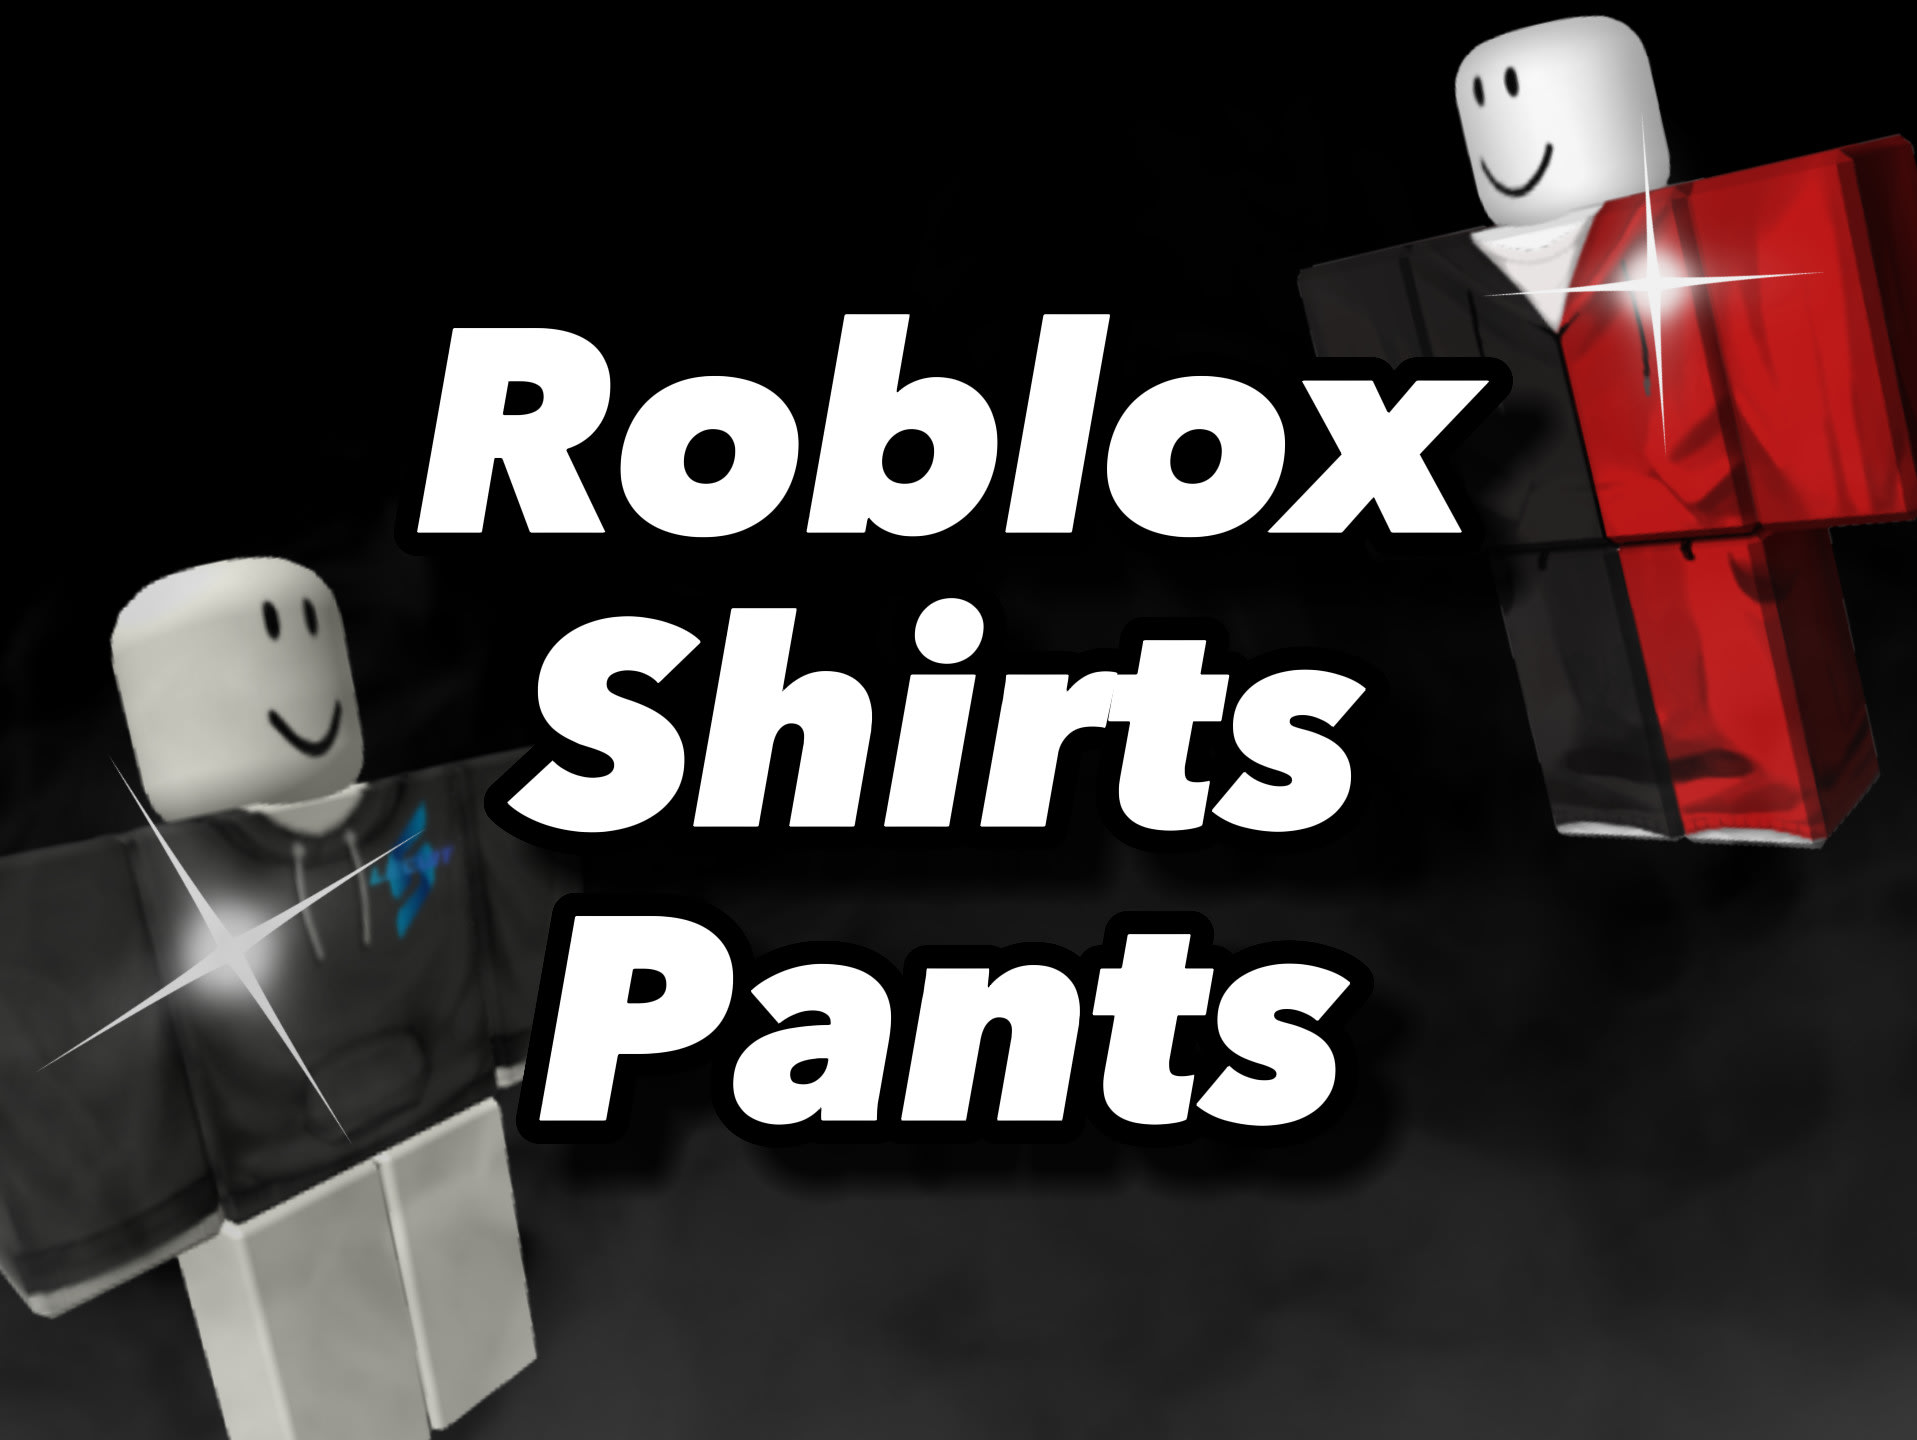 Duchess Inaccurate Bog Create a roblox shirt by Lecuit | Fiverr